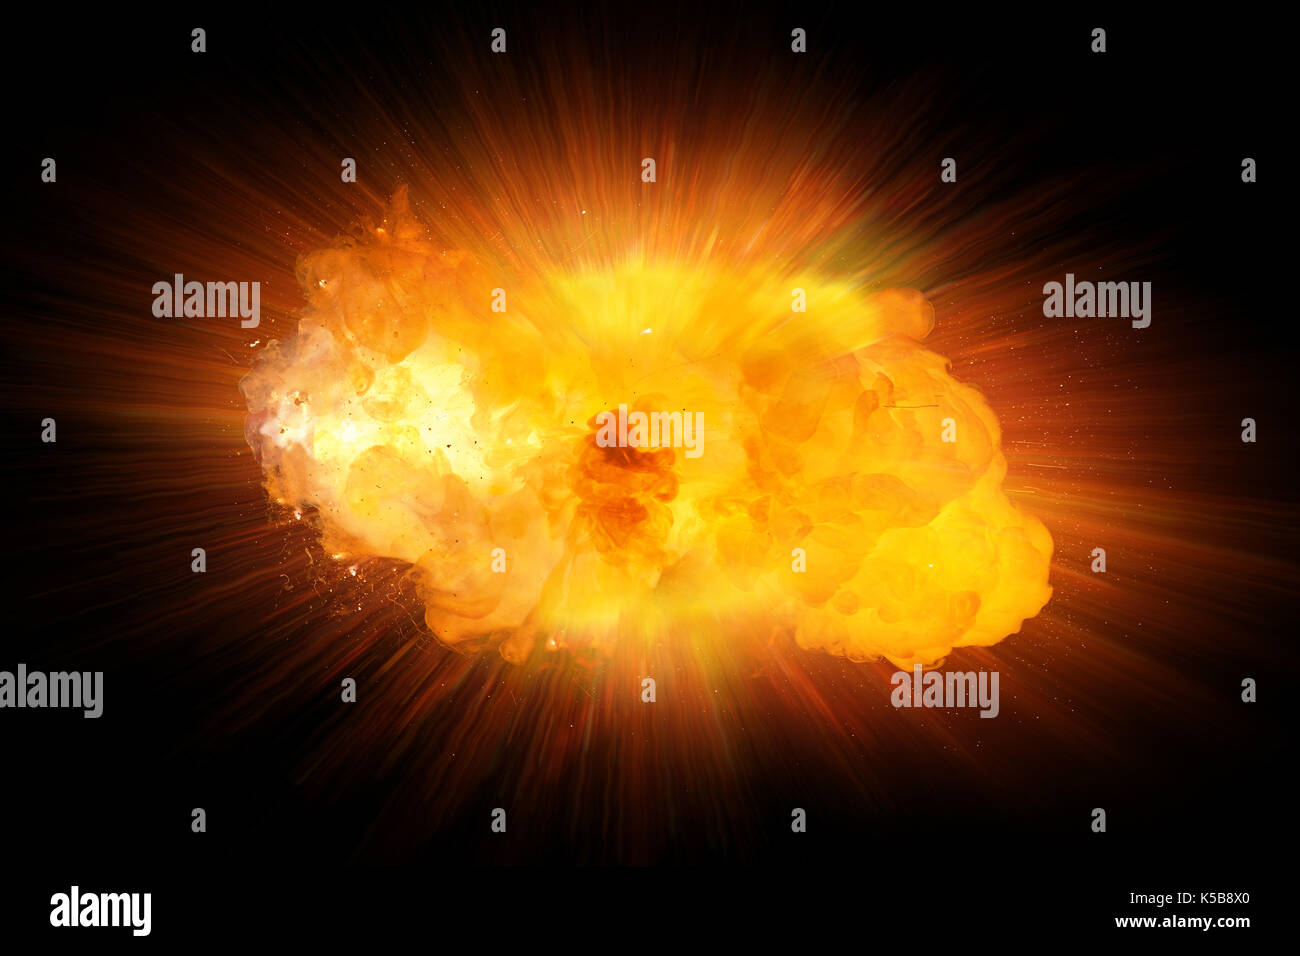 Realistic fire explosion, orange blast with sparks isolated on black background Stock Photo